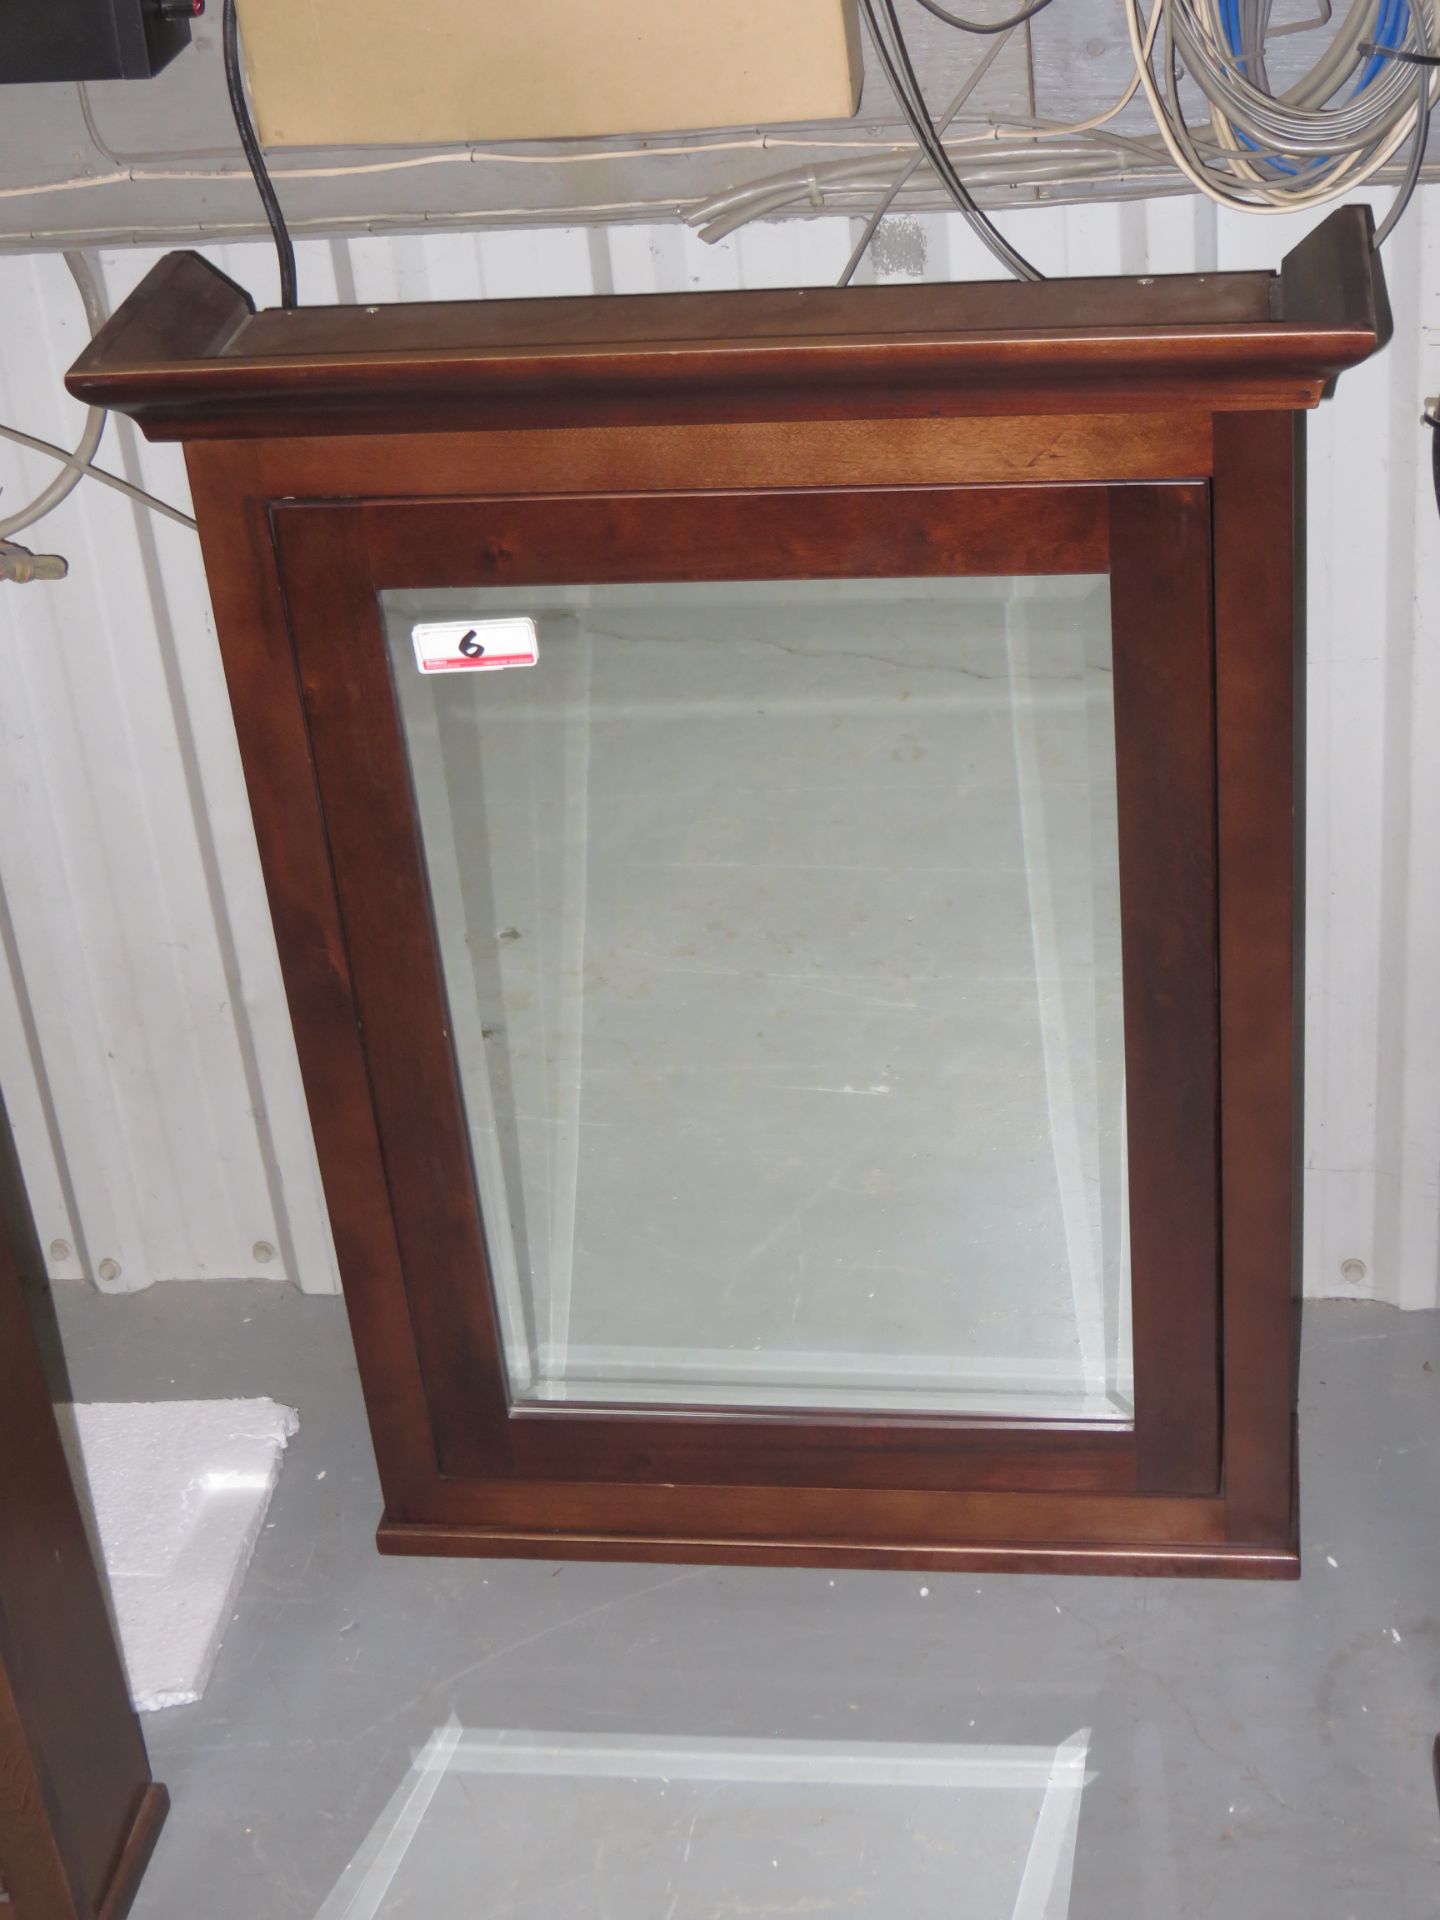 ROASTED CHESTNUT WOOD STAIN 25" X 32" MEDICINE CABINET W/ CROWN